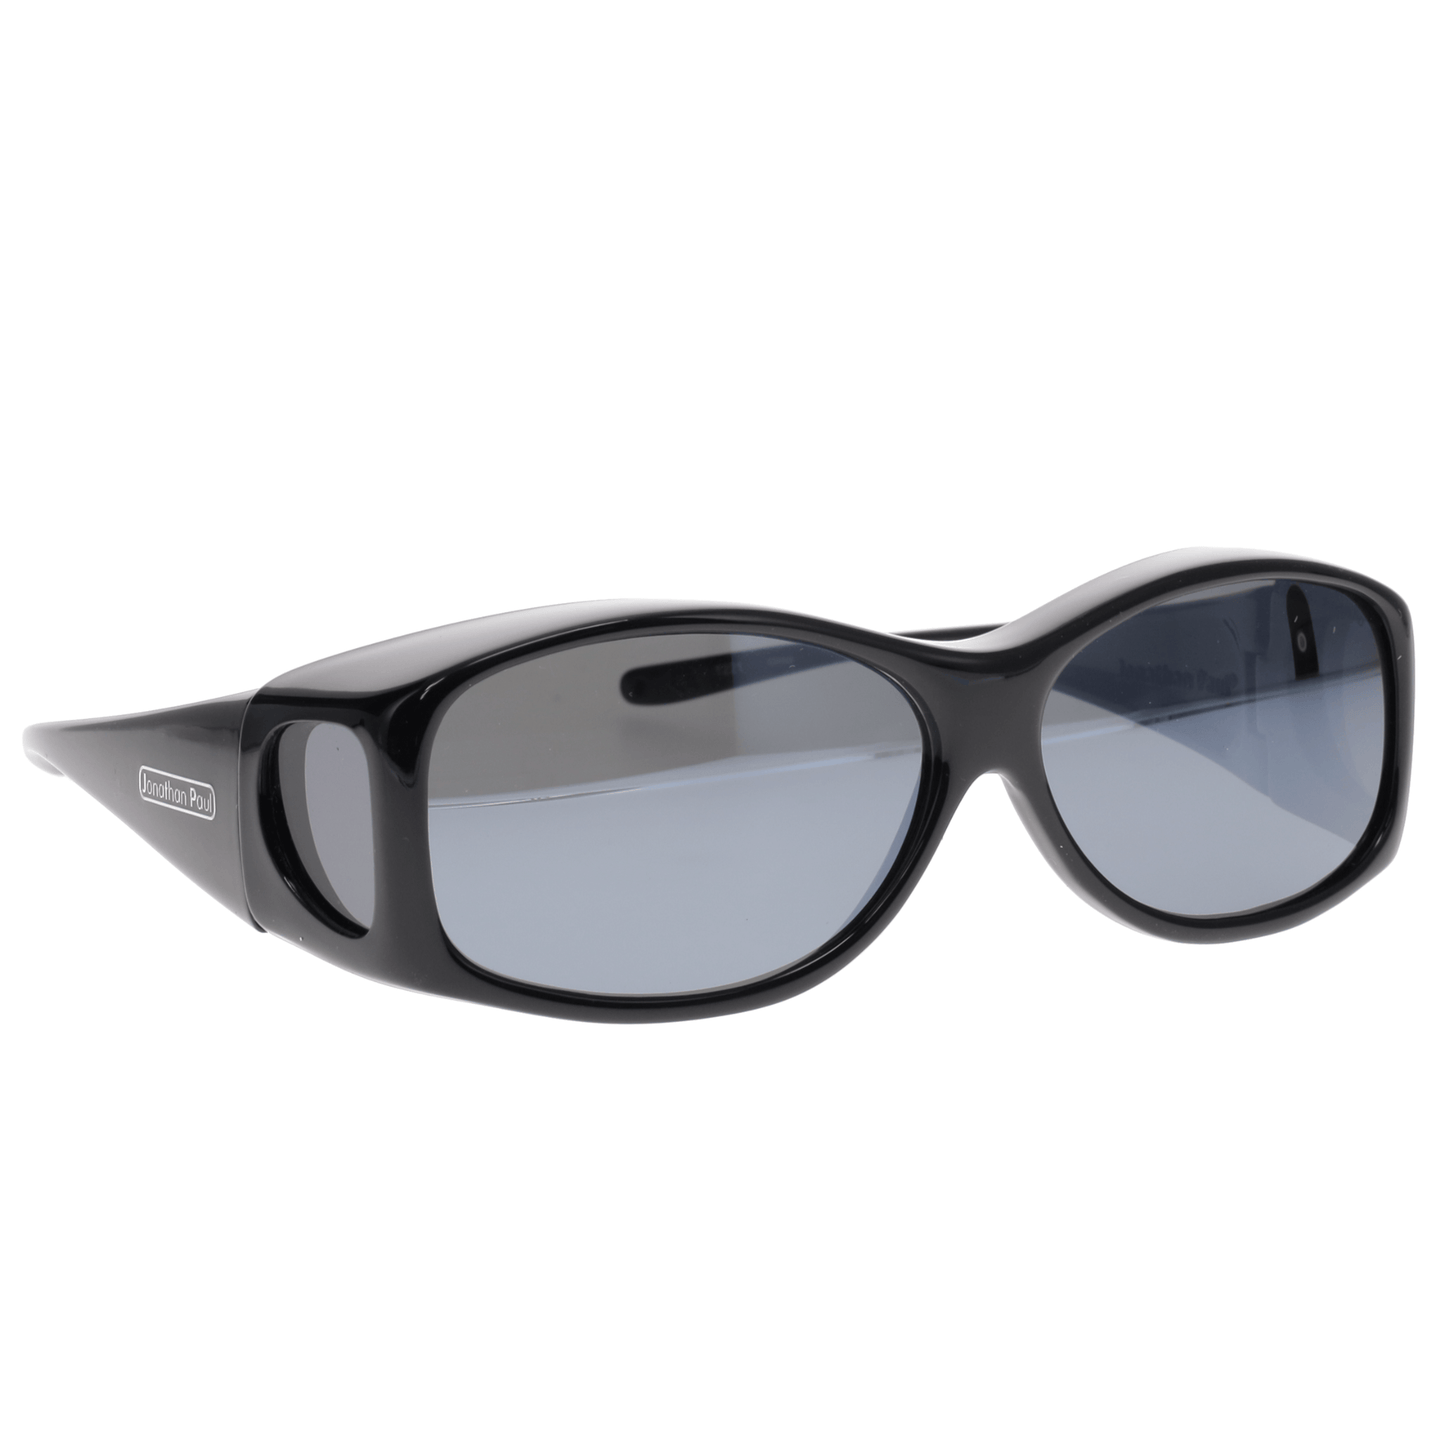 Fitover Sunglasses 'Glides' Midnight Oil - Grey Lens